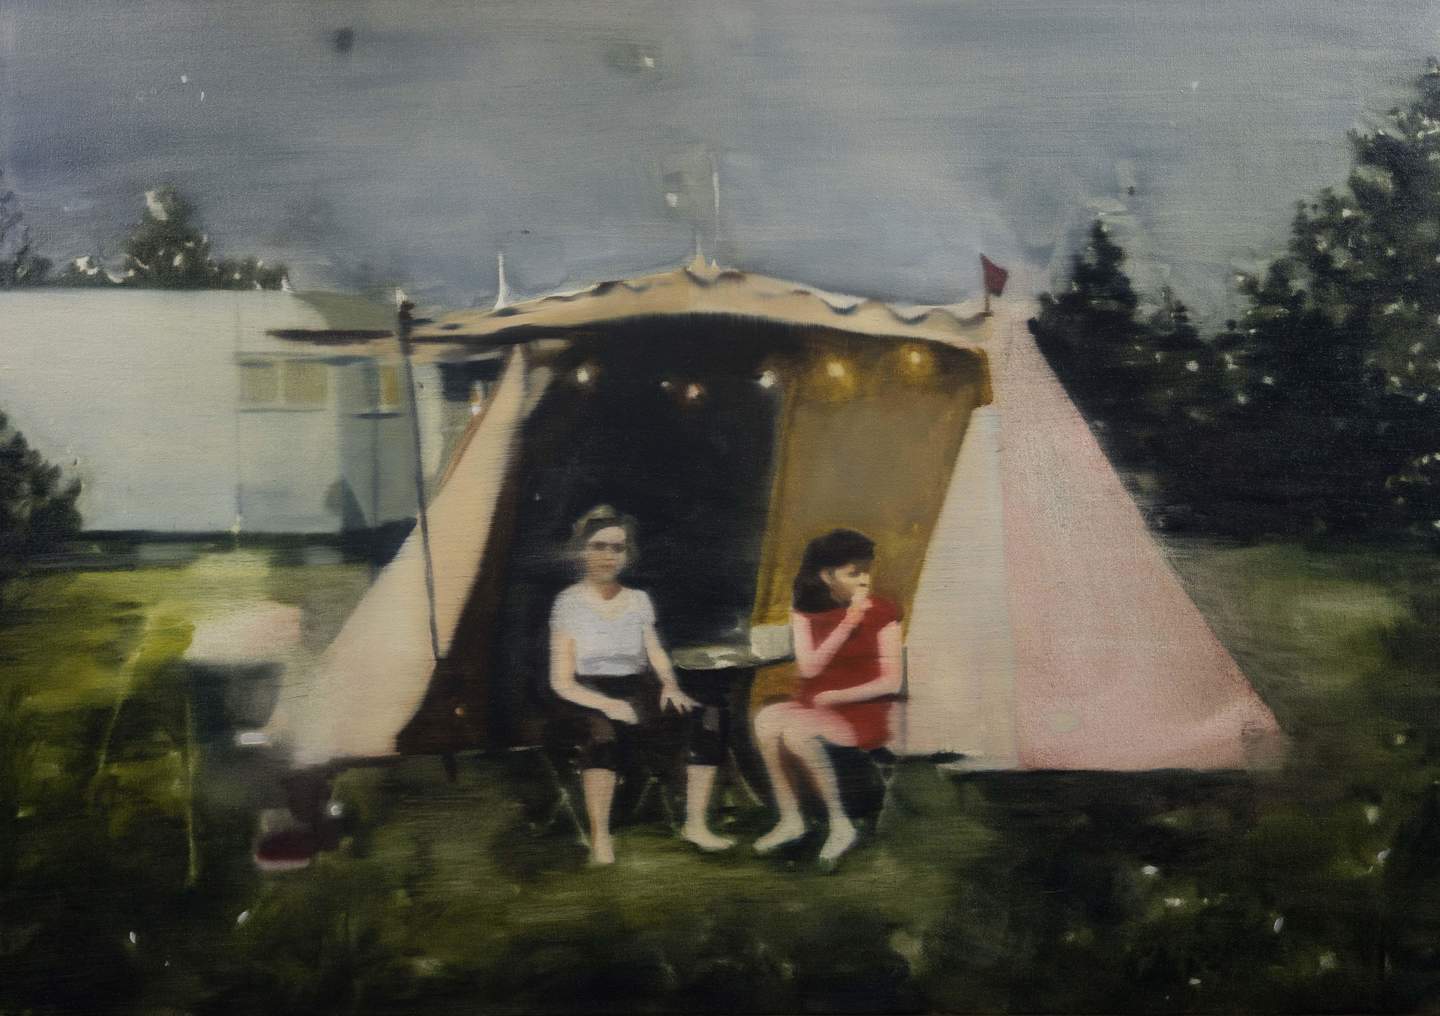 Painting of two women seated at a table at a campsite surrounded by greenery.